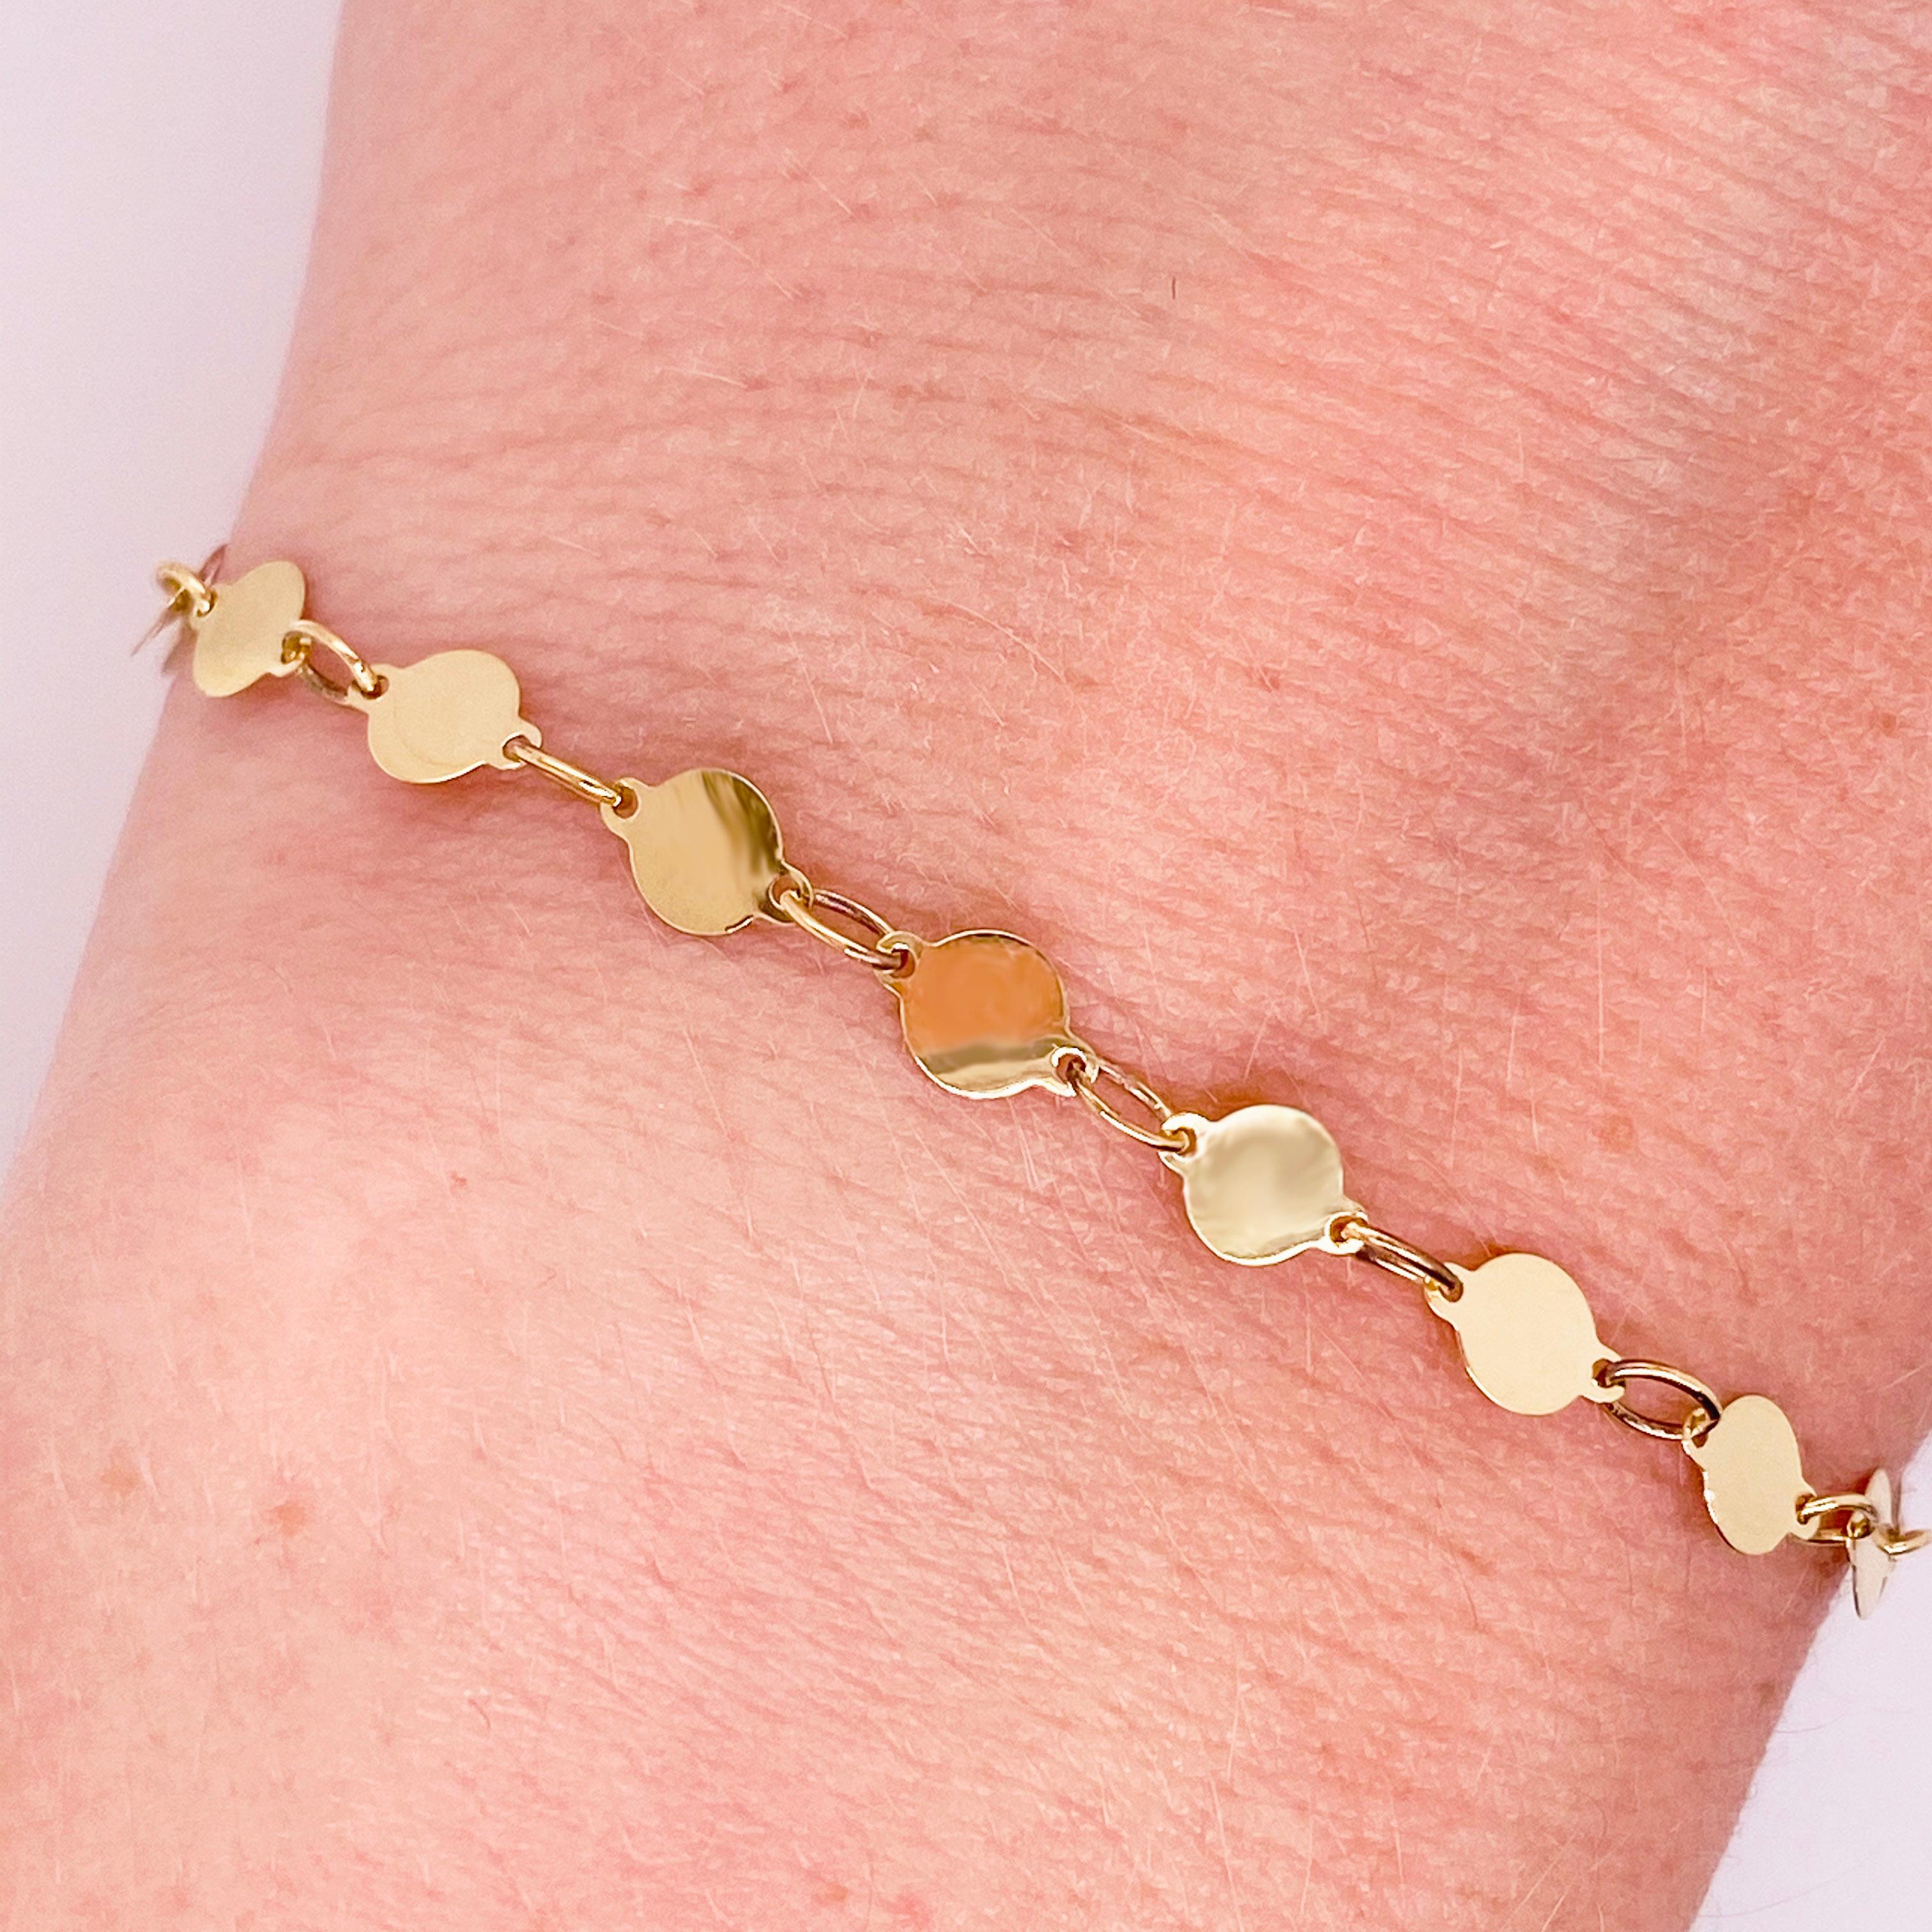 This 14k yellow gold sparkly, chain bracelet matches everything and is the perfect addition to any outfit, casual or formal. Paired it with other bracelets, this bracelet will make everything more shimmery! This bracelet would make the perfect gift